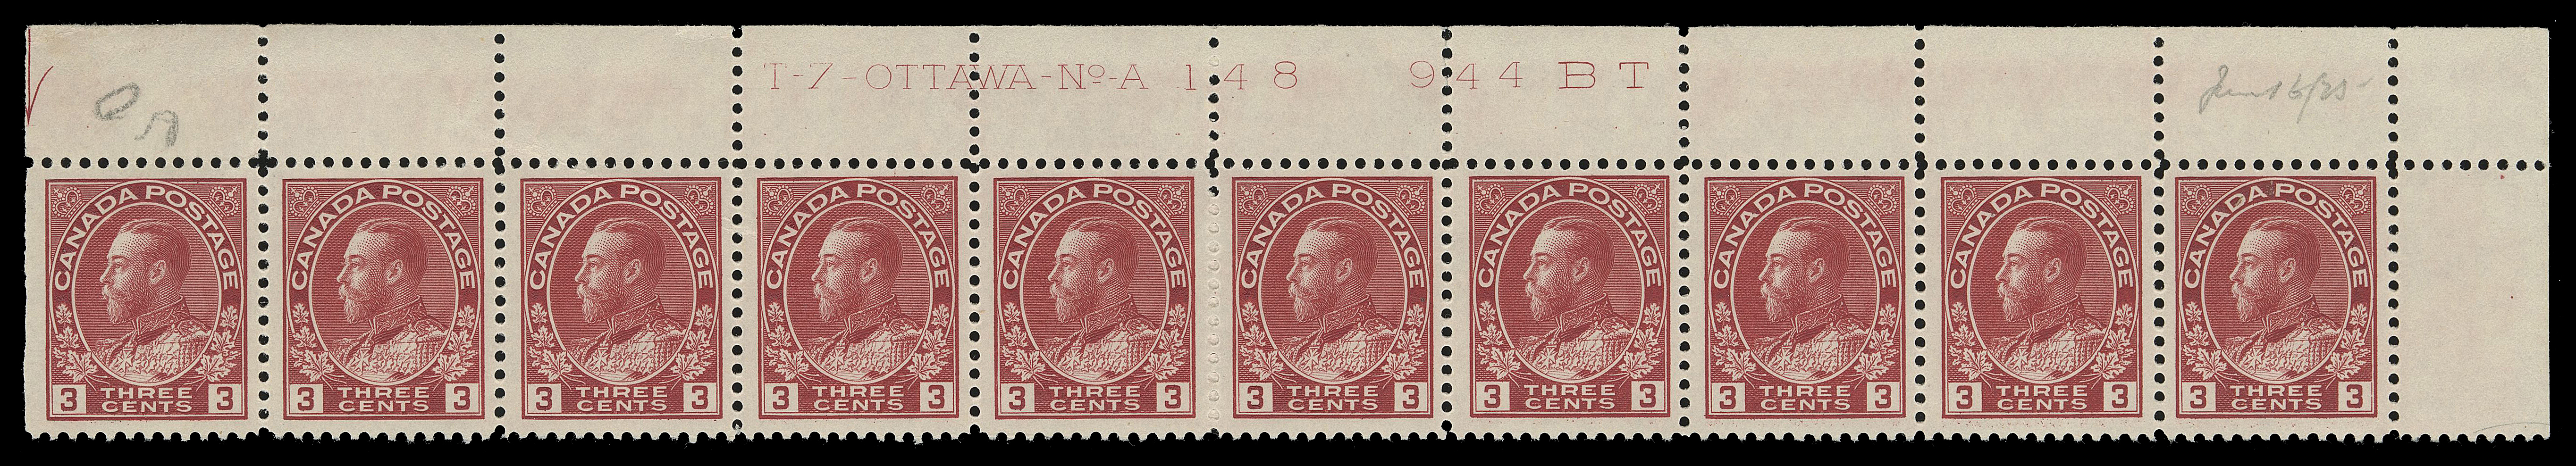 ADMIRAL STAMPS  109c,A fresh upper right Plate 148 strip of ten of the scarcer die, LH in selvedge leaving stamps VF NH; the only reported Plate 148 multiple per Glen Lundeen census on the BNAPS website. (Unitrade cat. $2,100+)